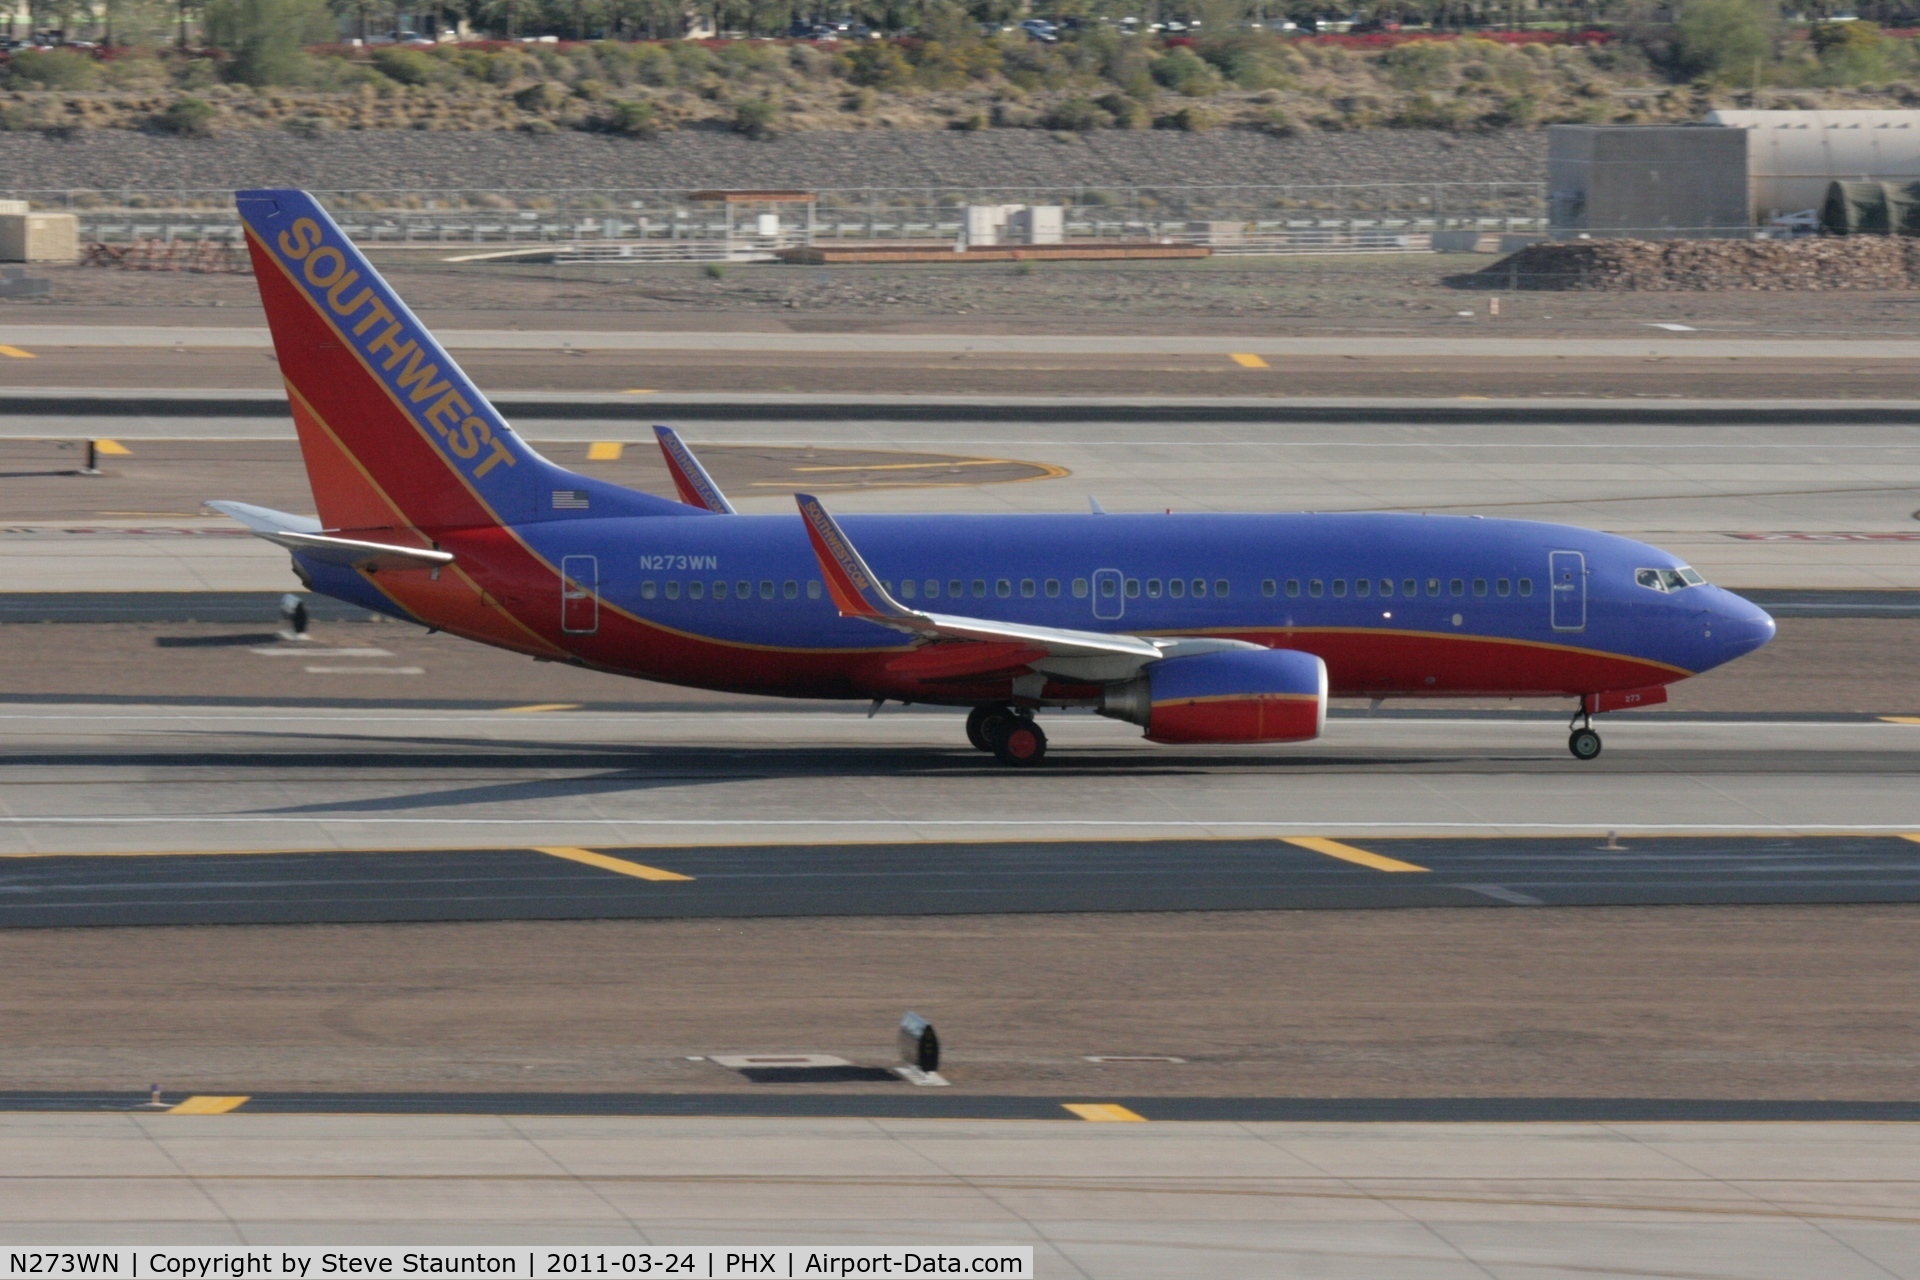 N273WN, 2007 Boeing 737-7H4 C/N 32528, Taken at Phoenix Sky Harbor Airport, in March 2011 whilst on an Aeroprint Aviation tour